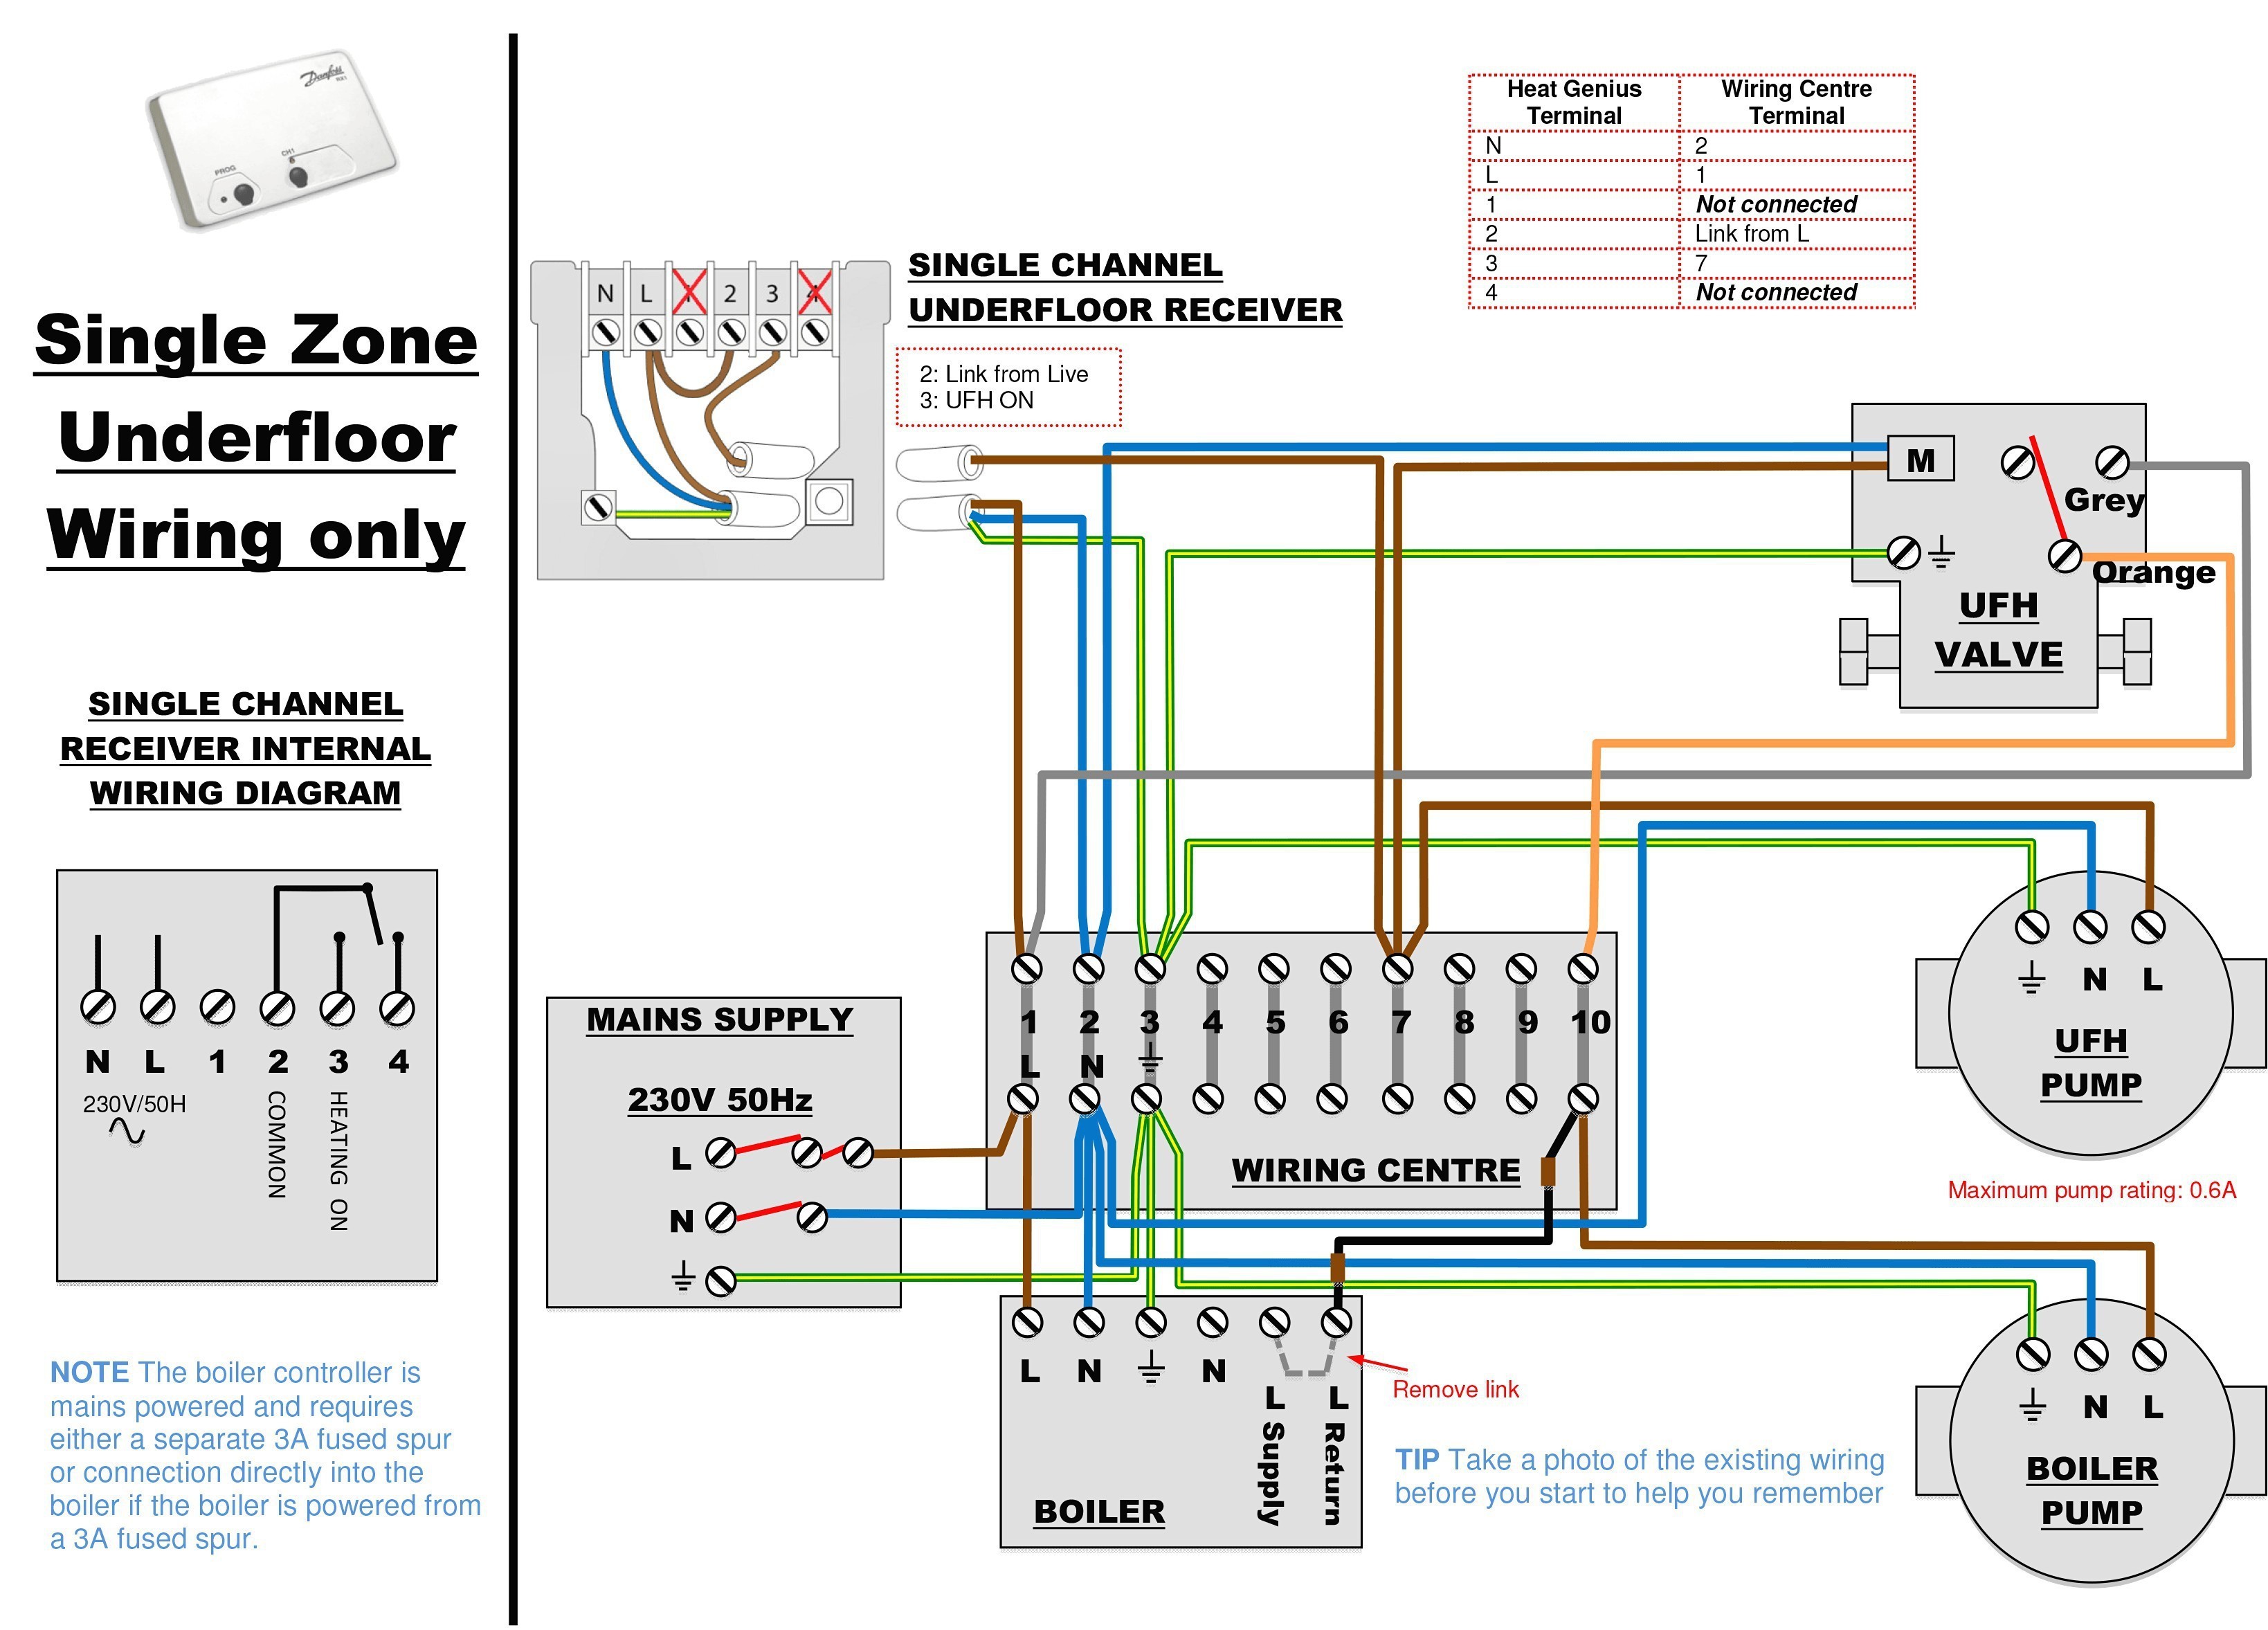 Wiring Diagram Electric Water Heater Fresh Electric Water Heater thermostat Wiring Diagram Fresh Electric Water